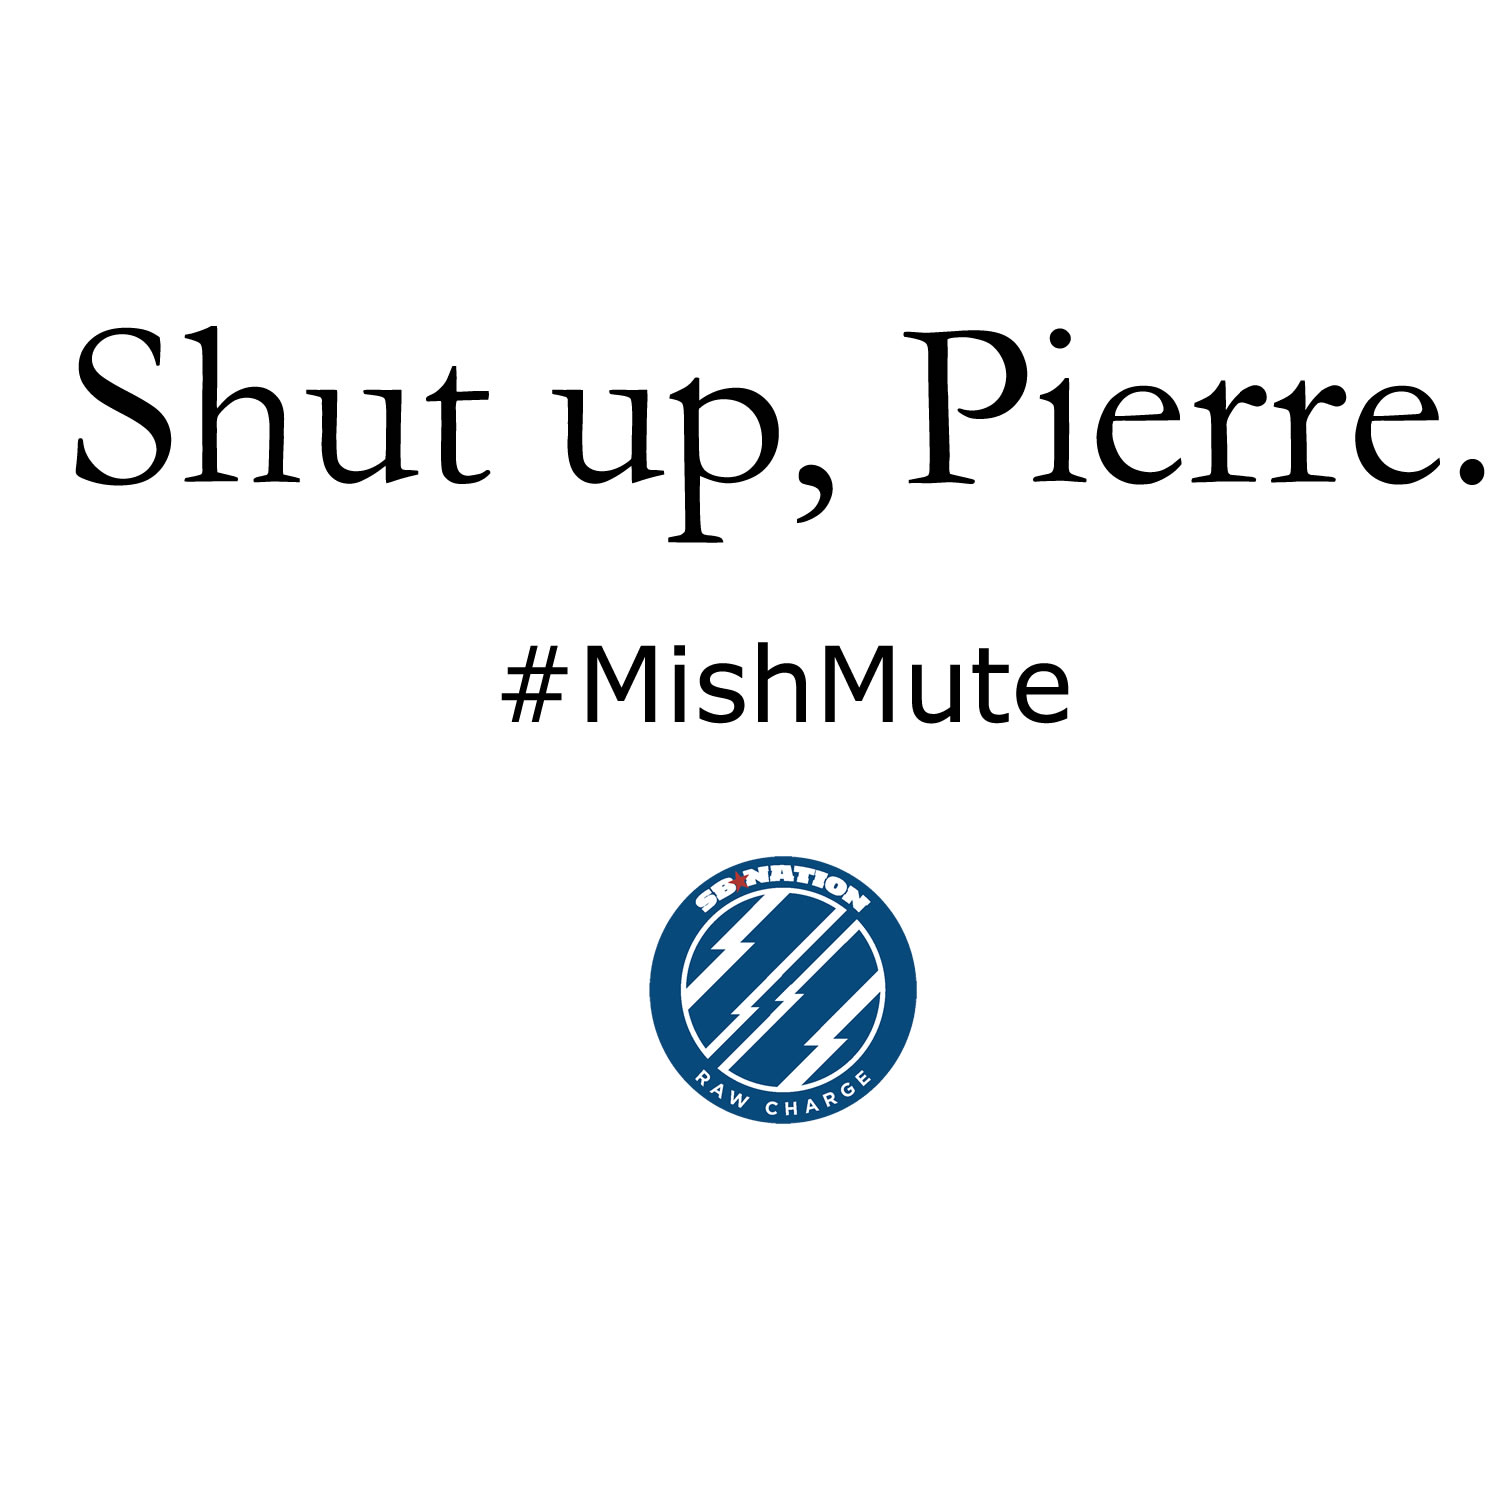 It's what you say all-too-often during a nationally televised NHL broadcast. The #Mishmute thing? That's what Bolts fans sometimes do to remedy it.